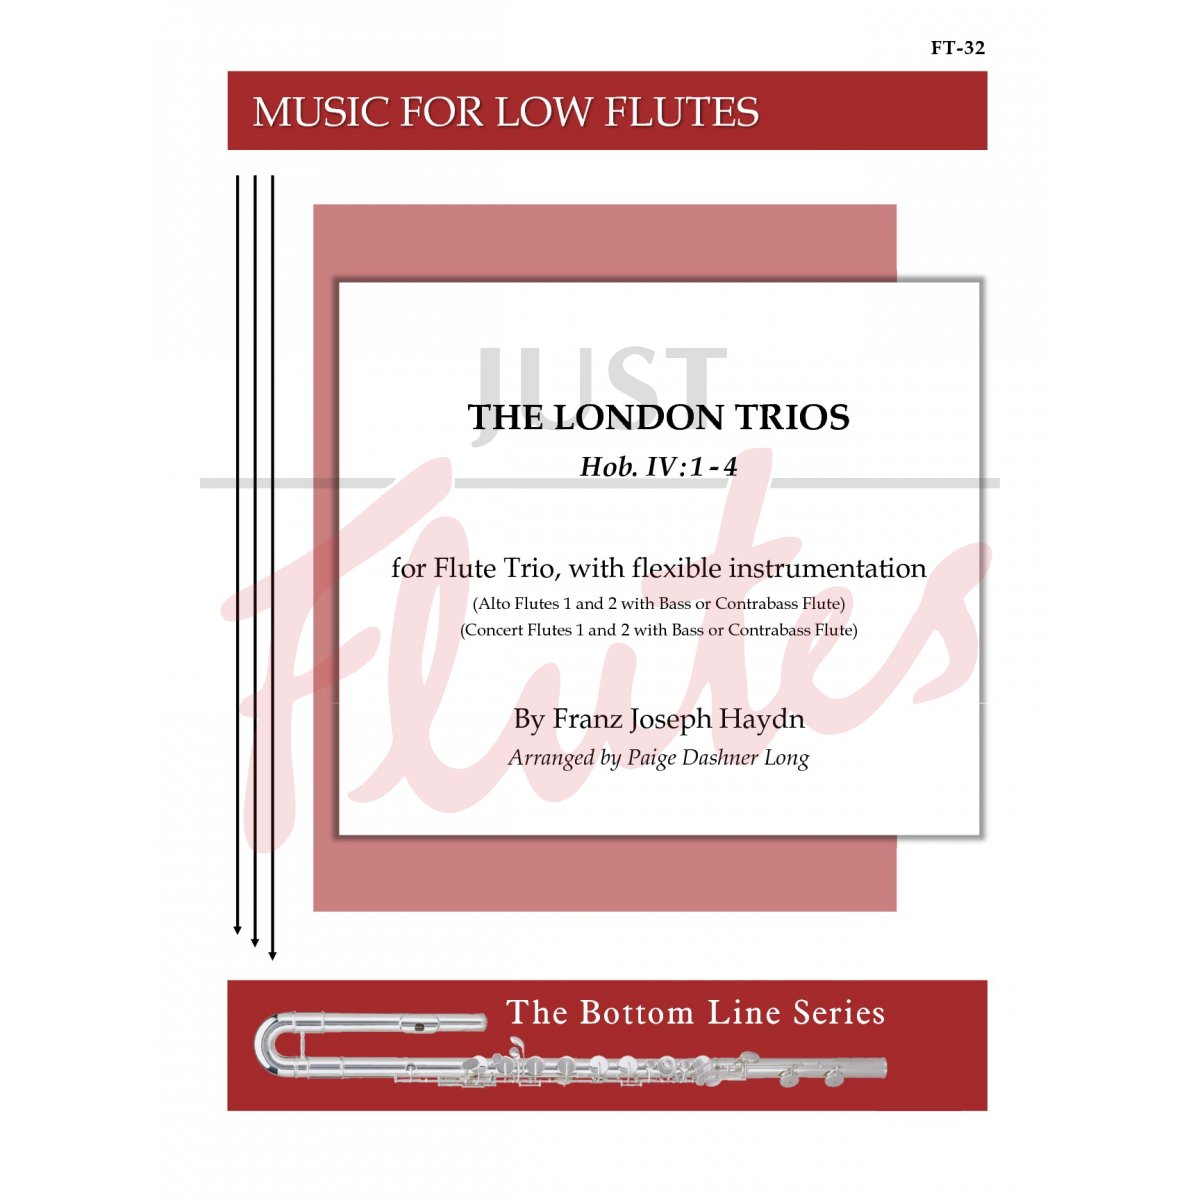 The London Trios for Three Low Flutes